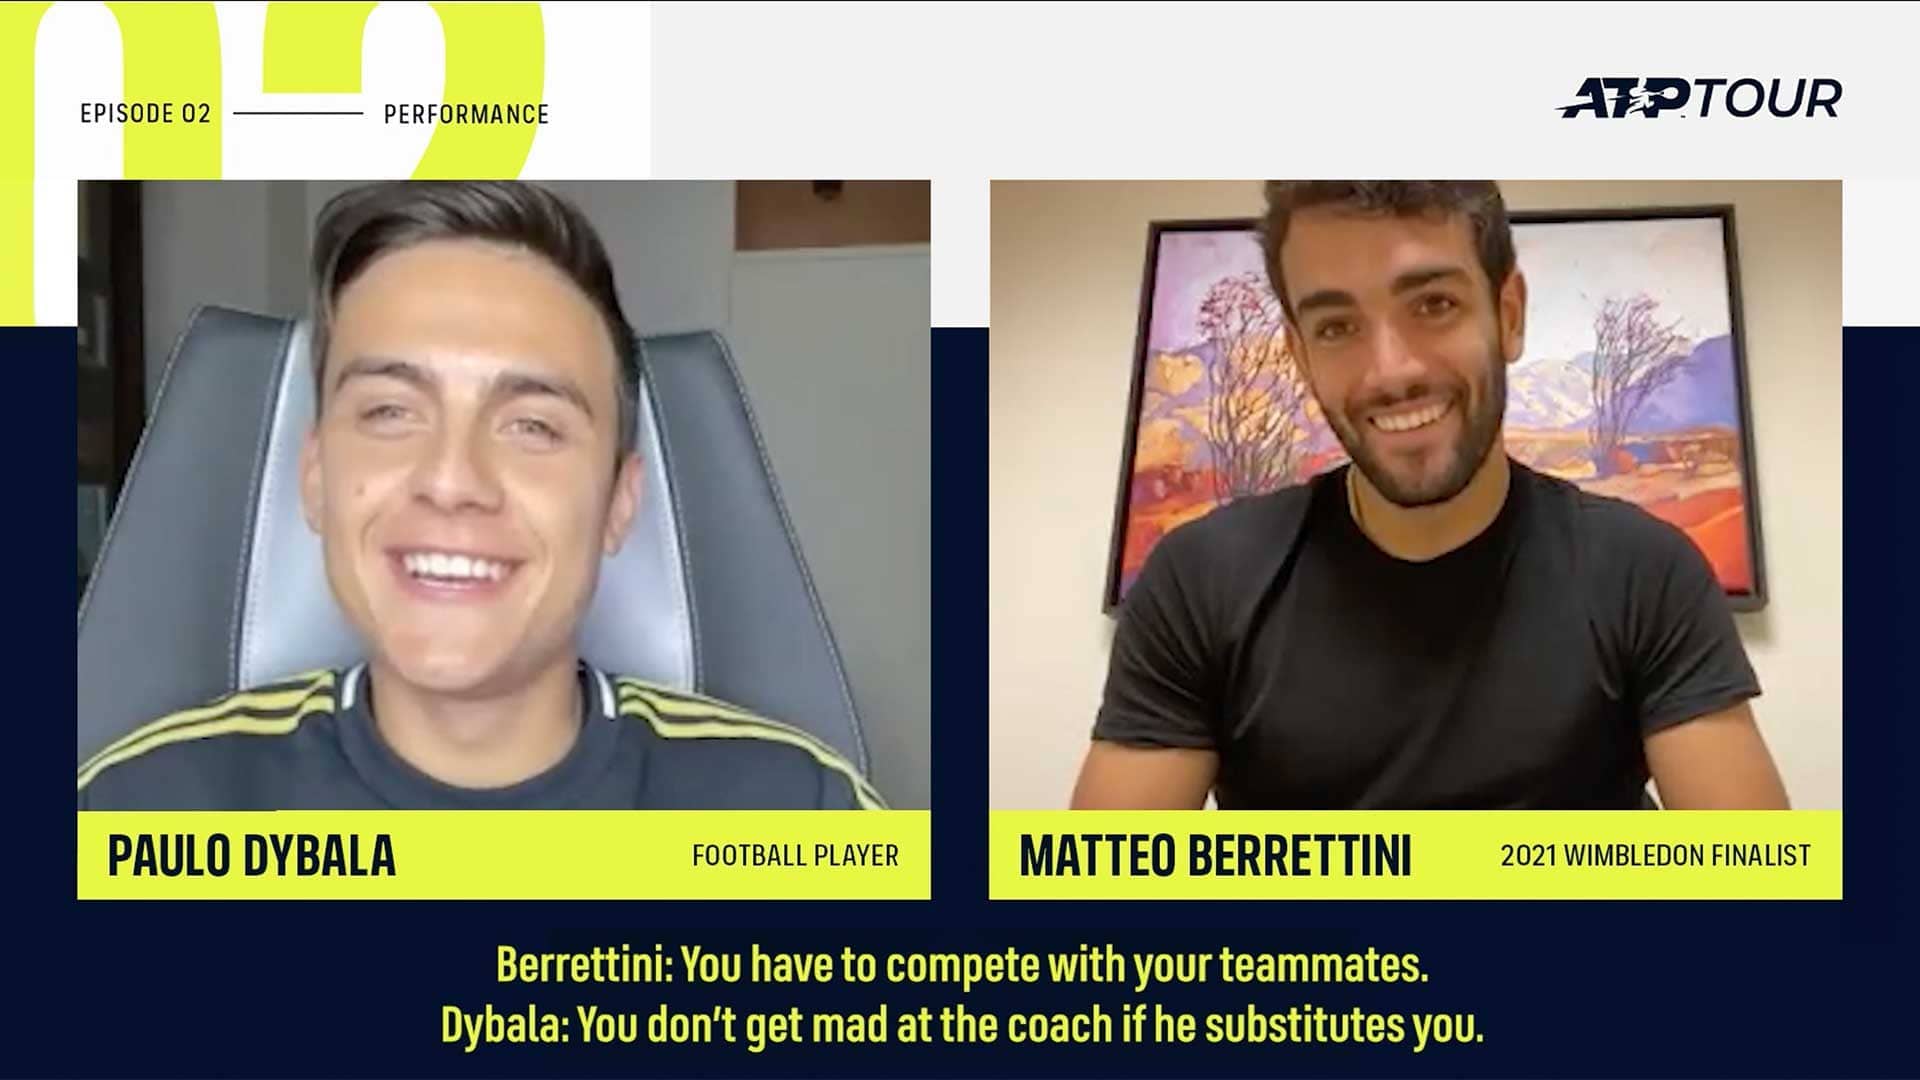 Paulo Dybala and Matteo Berrettini discuss the pressures of competing in elite level sport. 